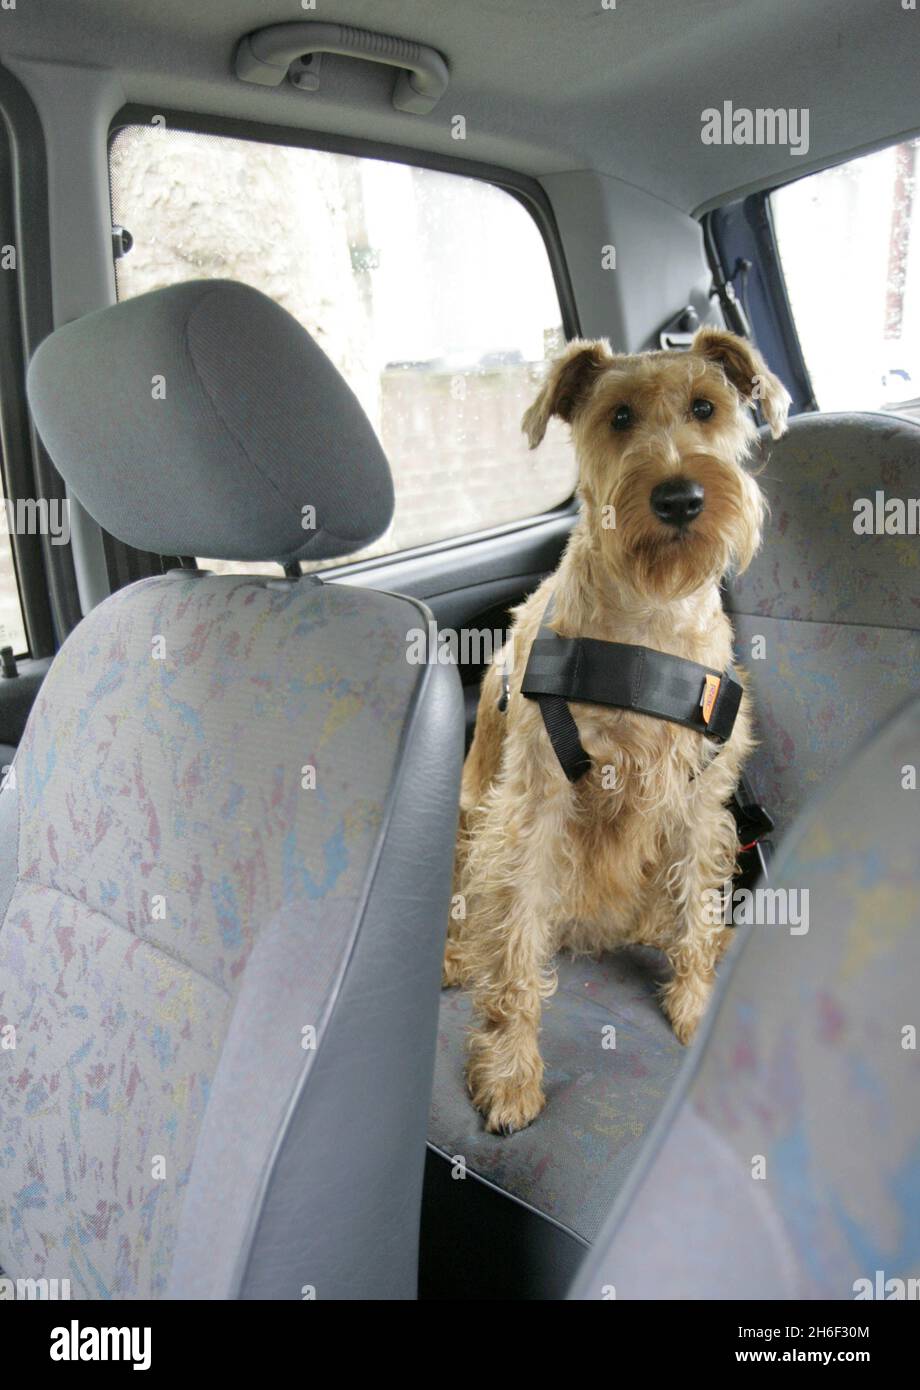 A dog wearing a RAC seatbelt harness. Specially-designed seatbelts should be used to strap-in pets during car journeys to stop them becoming lethal objects in a crash, it has been warned. Animal welfare charity PDSA says that an animal could injure itself or its owner in a smash that might otherwise have left the vehicle's occupants unhurt. Large dogs can belt up with a safety harness that fits around the animal's chest, back and shoulders and which is then clipped into an ordinary seat belt Stock Photo